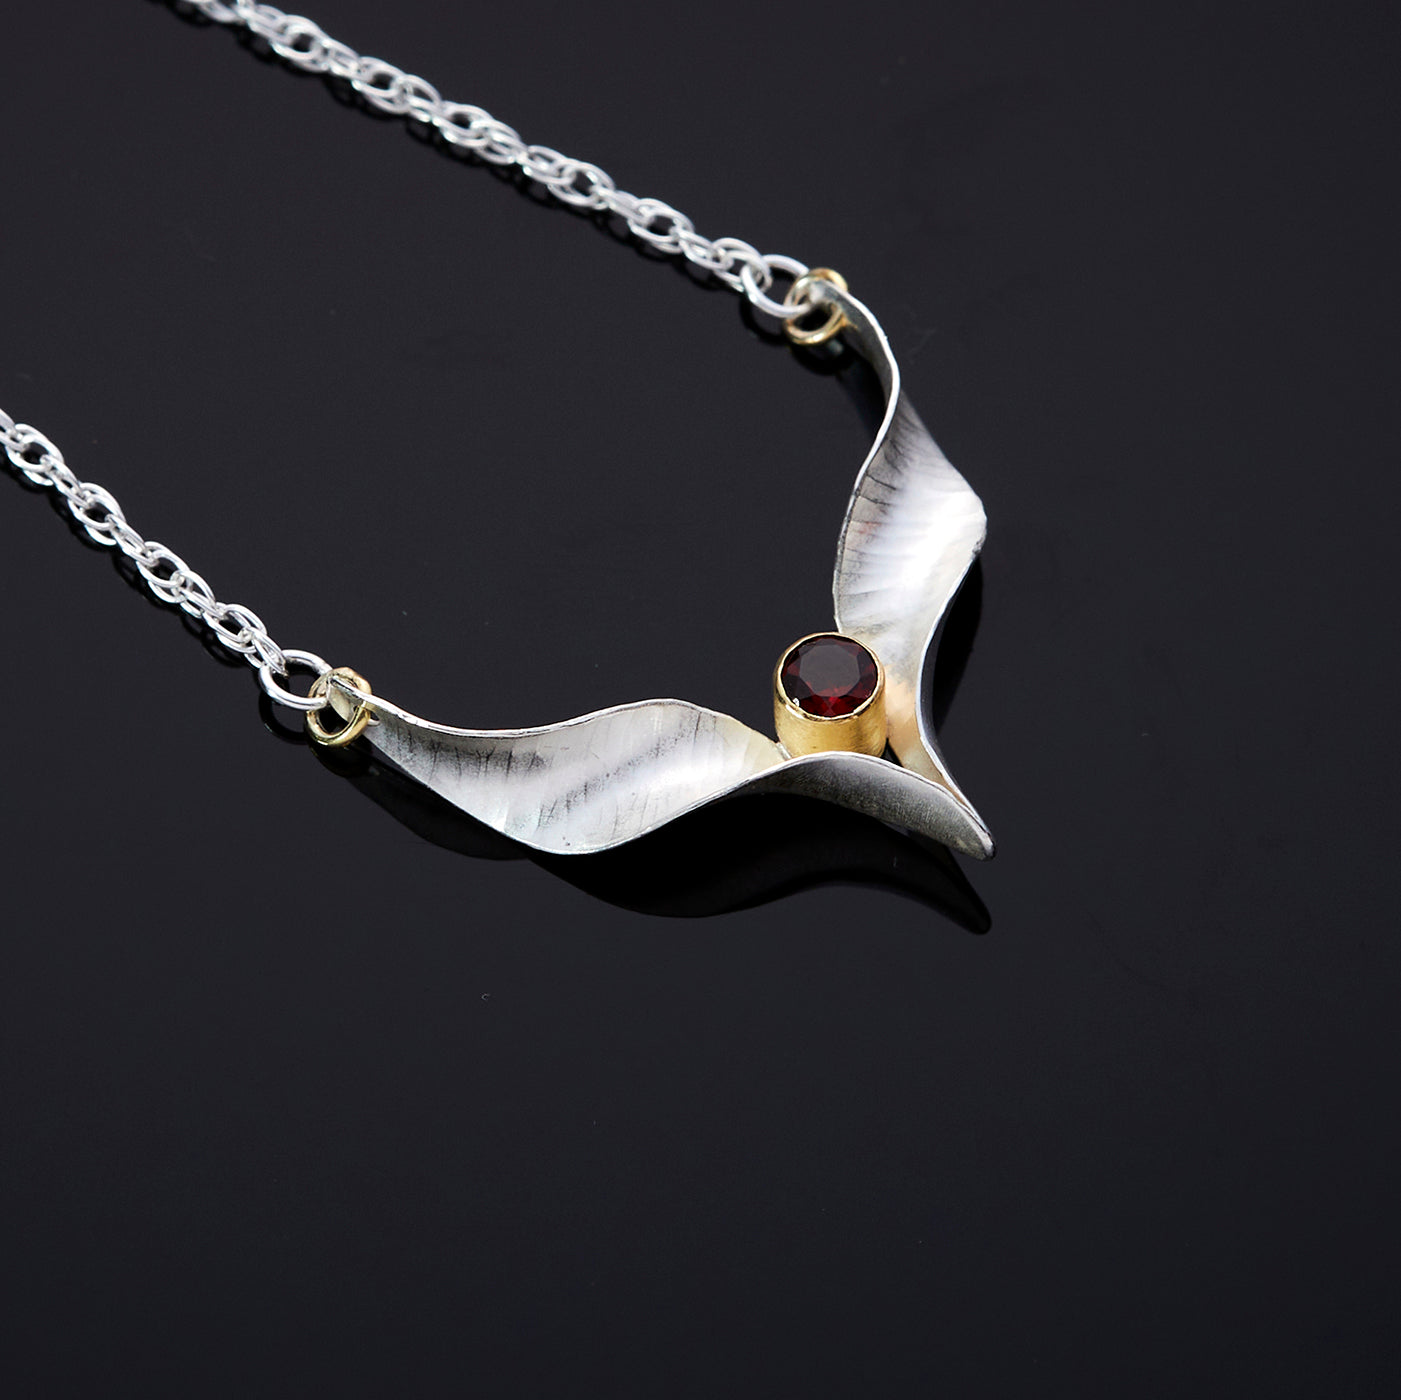 A silver bird necklace made from two mirror-image twisted and curled units. They are  soldered at the lower point and attached to a silver rope chain by an 18 carat gold  jump ring at each outer point. A sparkling red garnet is set in a length of 18 carat gold tube which sits above the lower point where the two units meet.